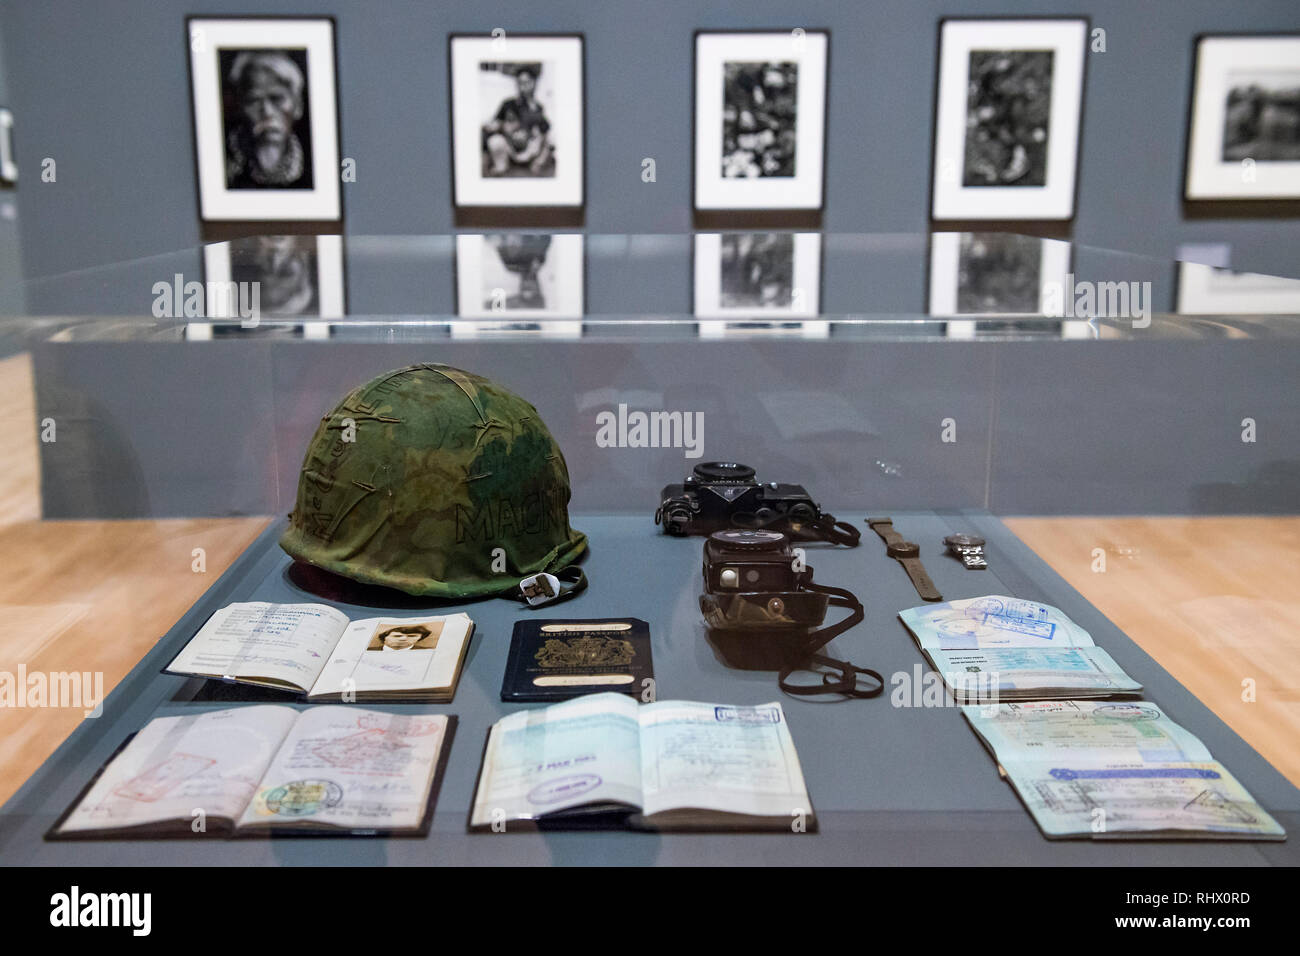 London, UK. 4th February, 2019. Passports, cameras and a Magnum helmet - A retrospective of the British photographer Sir Don McCullin at Tate Britain. With over 250 photographs, all printed by the artist himself in his own darkroom. Often taken at great personal risk, his conflict photographs are shown alongside his work in documentary photography, his travel assignments and his long term engagement with landscape and still life. The exhibition runs from 5 Feb to 6 May 2019. Credit: Guy Bell/Alamy Live News Stock Photo